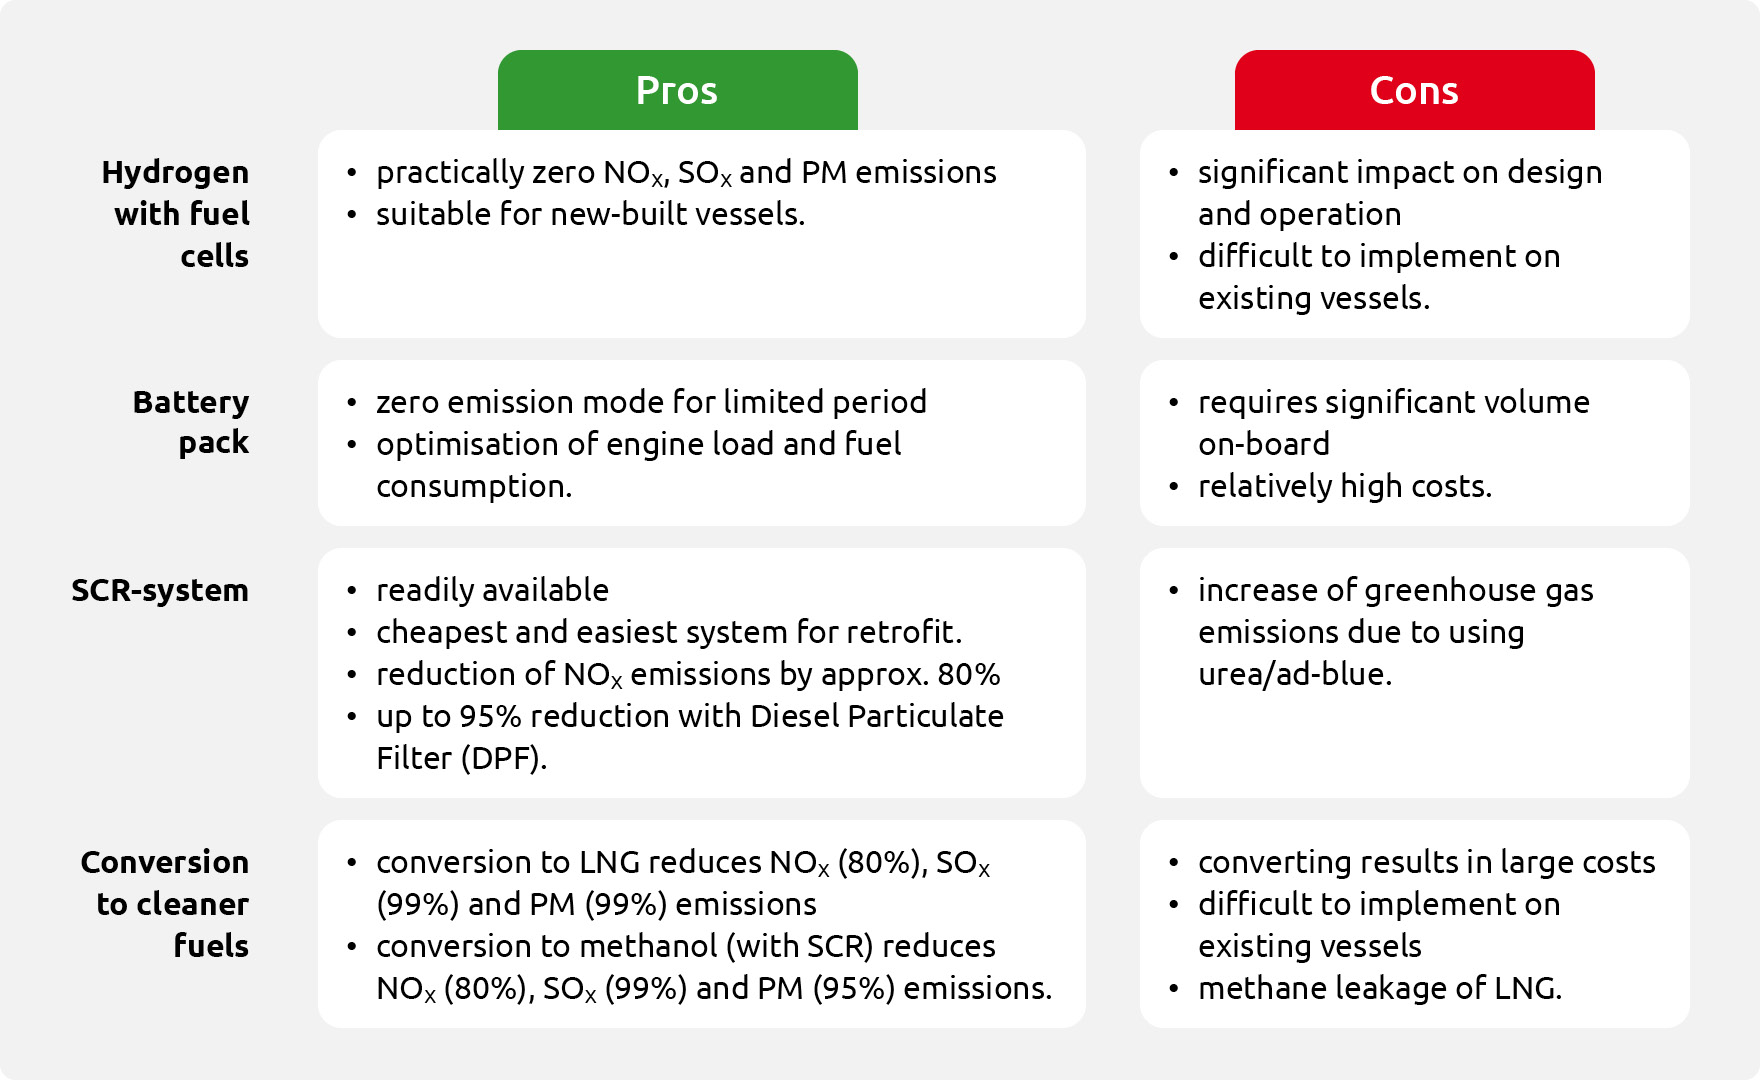 Table pros and cons solutions to reduce emissions